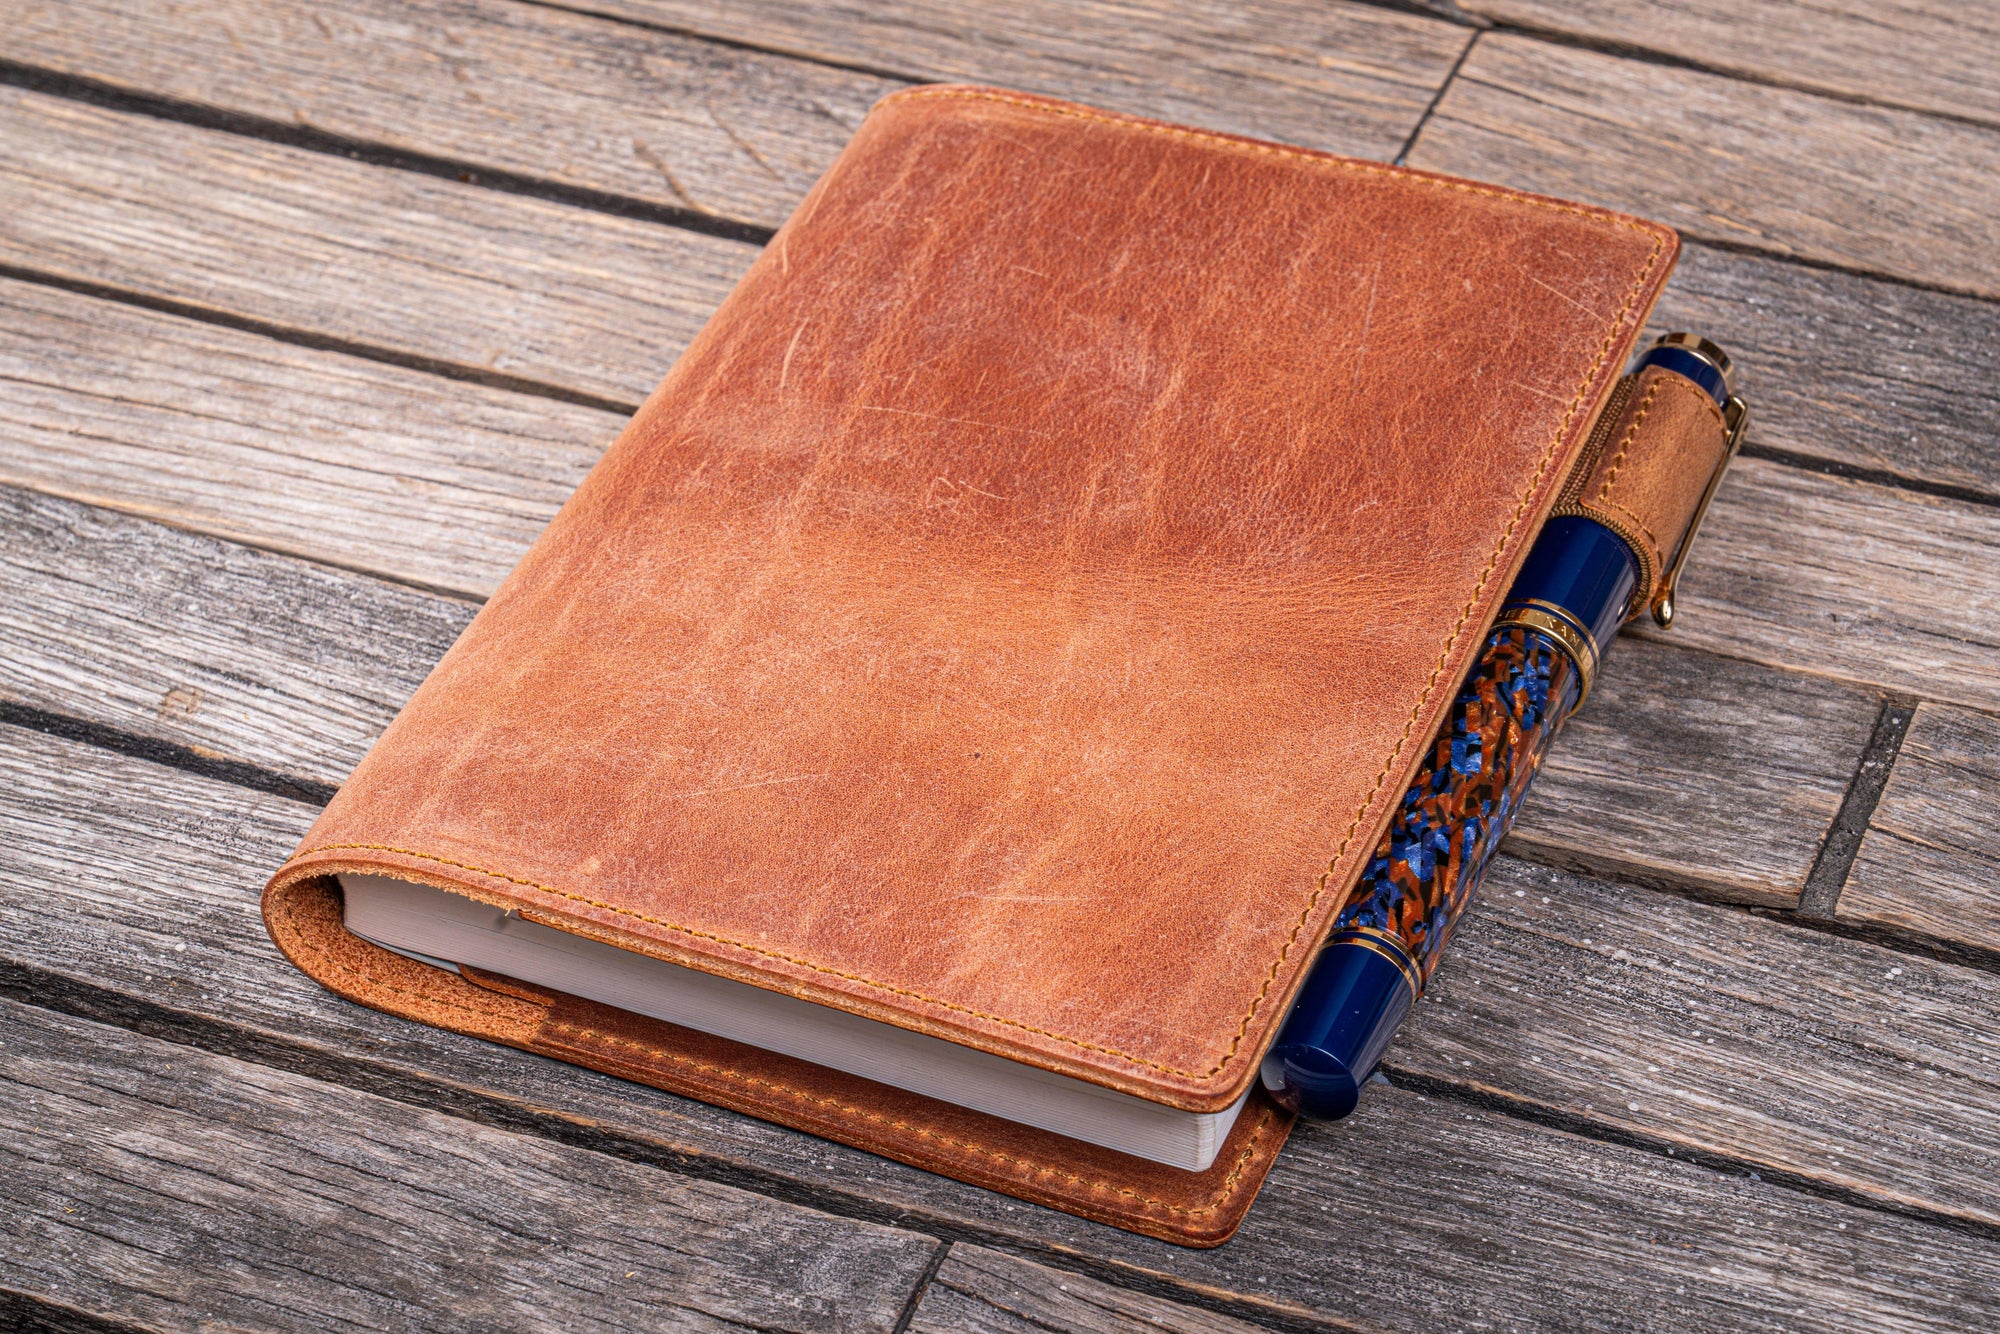 Horween Leather Notebook Cover Hatch Grain Epsom Leather 